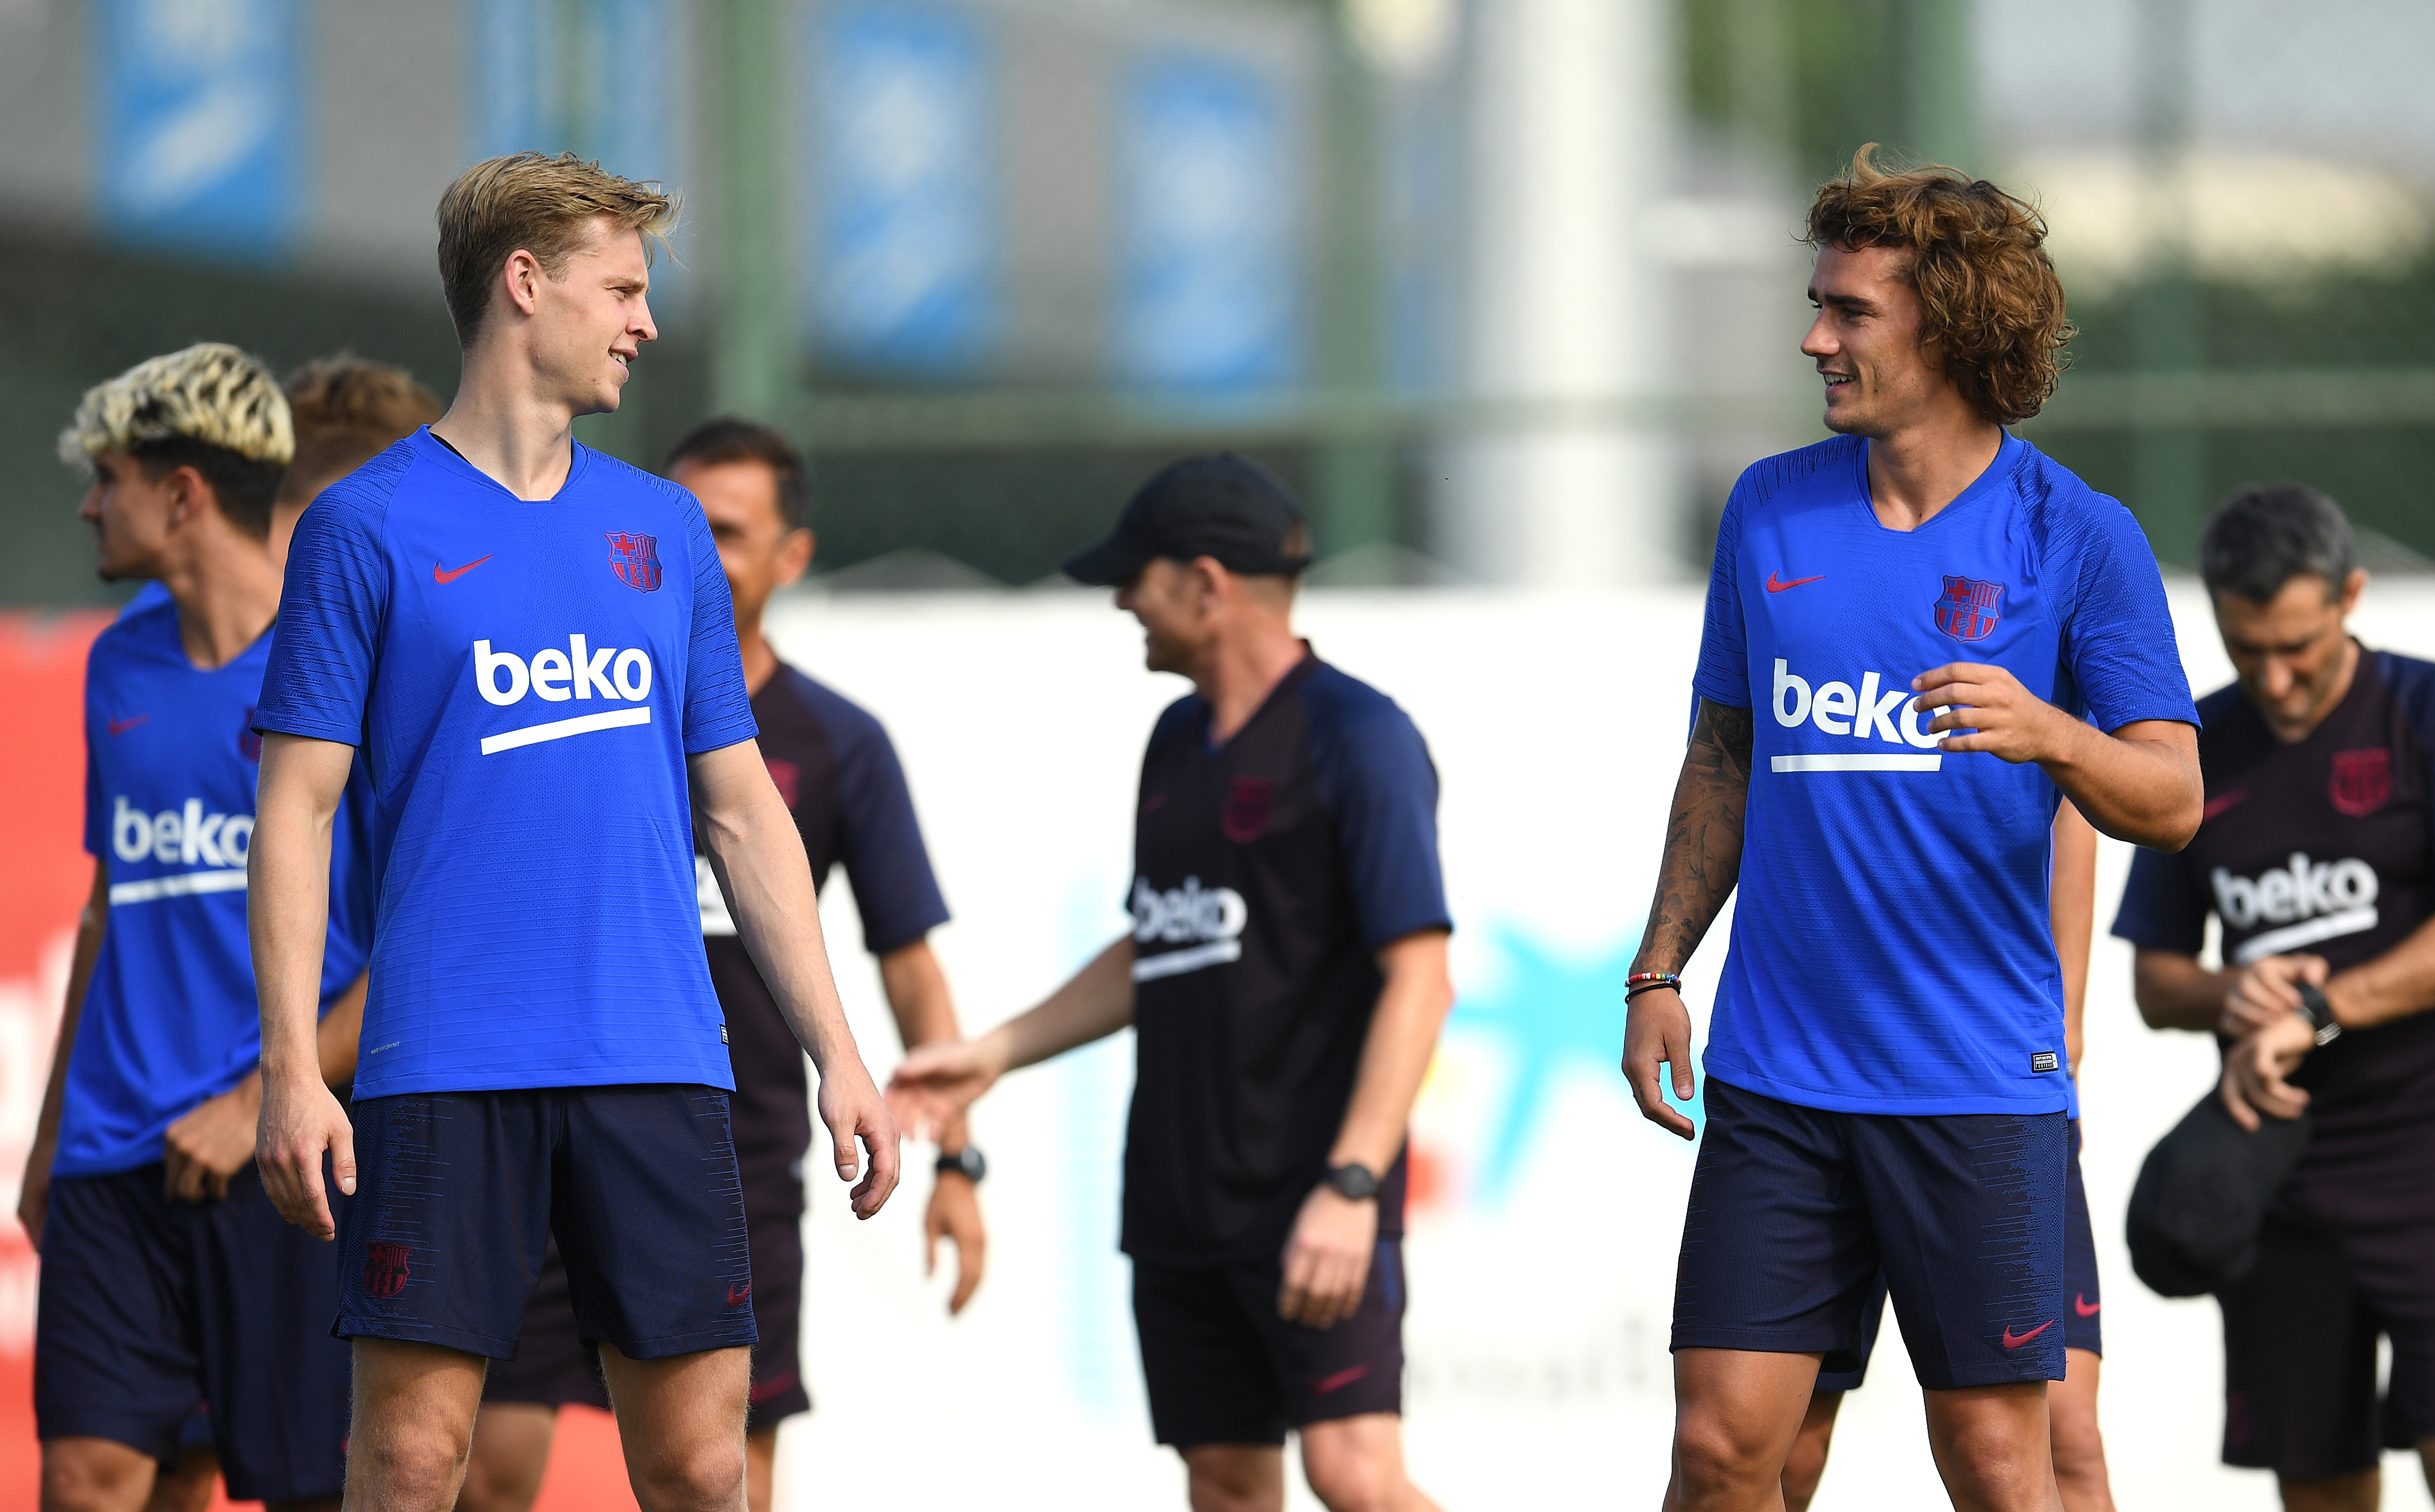 BARCELONA, SPAIN - JULY 15: Frenkie de Jong (L) and Antoine Griezmann of FC Barcelona look on during a training session at Ciutat Esportiva of Sant Joan Despi on July 15, 2019 in Barcelona, Spain. (Photo by David Ramos/Getty Images)